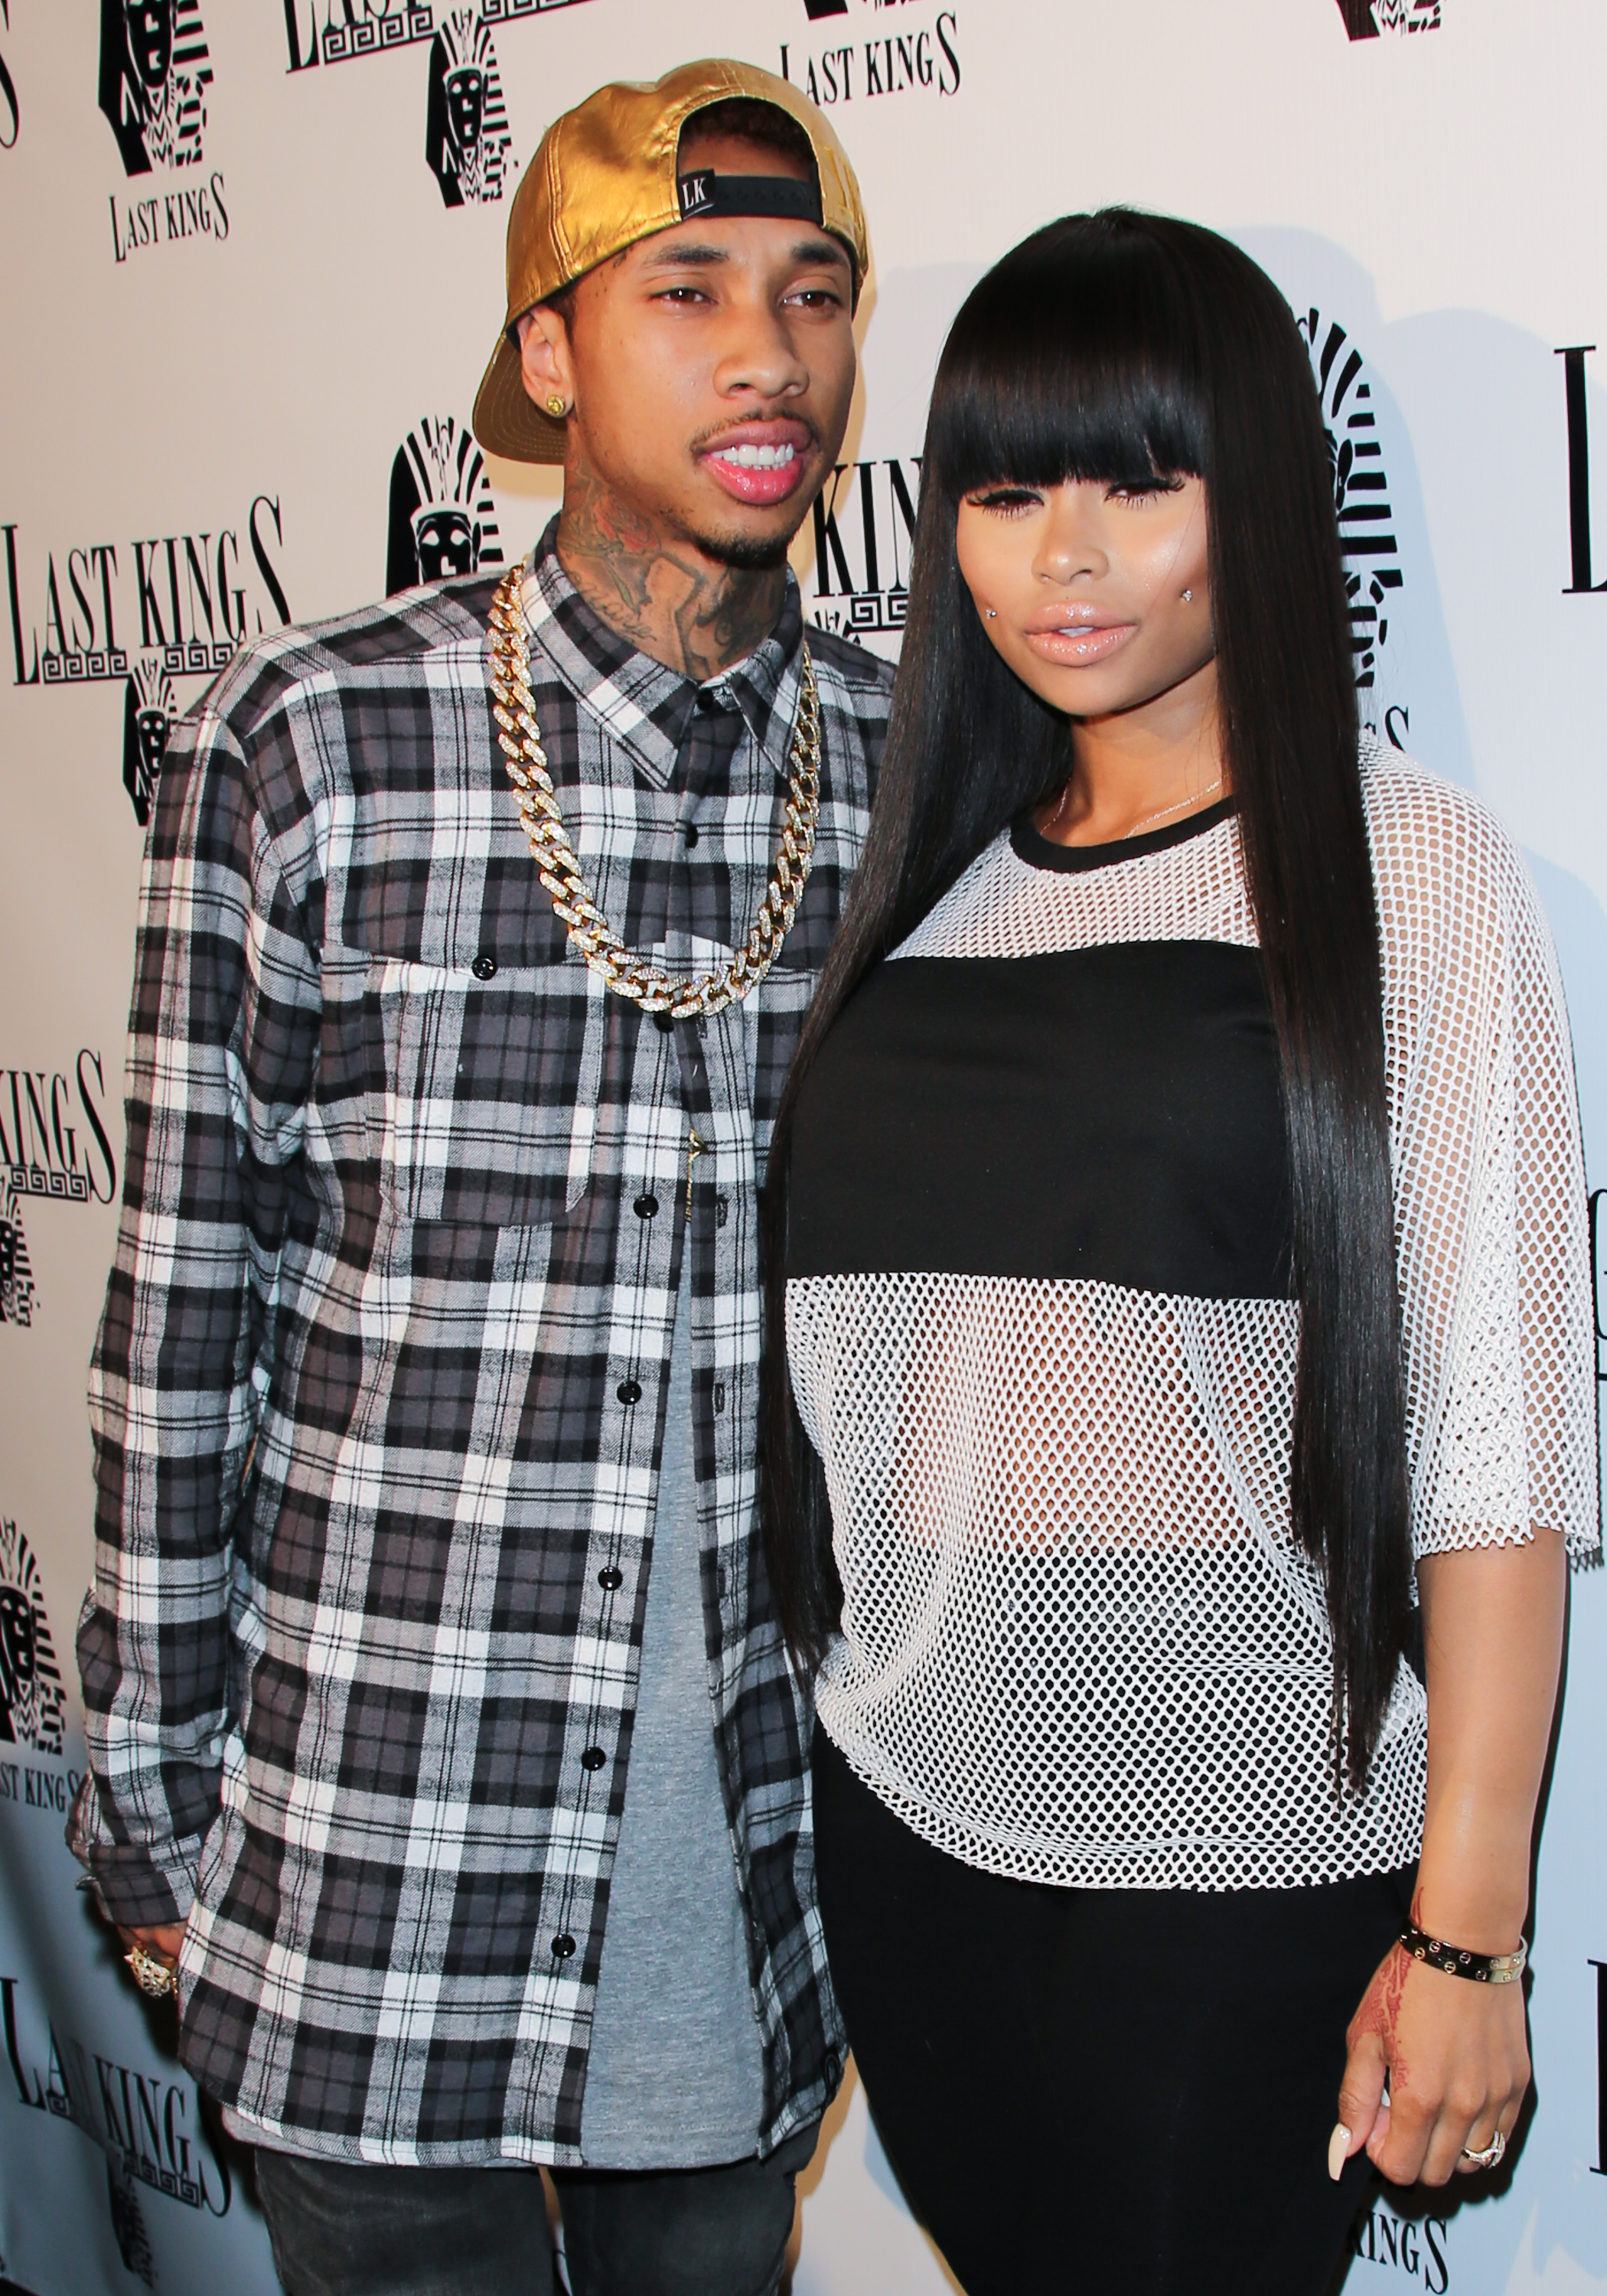 Blac Chyna Claims Tyga “Loves Trans,” Gets Slammed For “Outing” Him